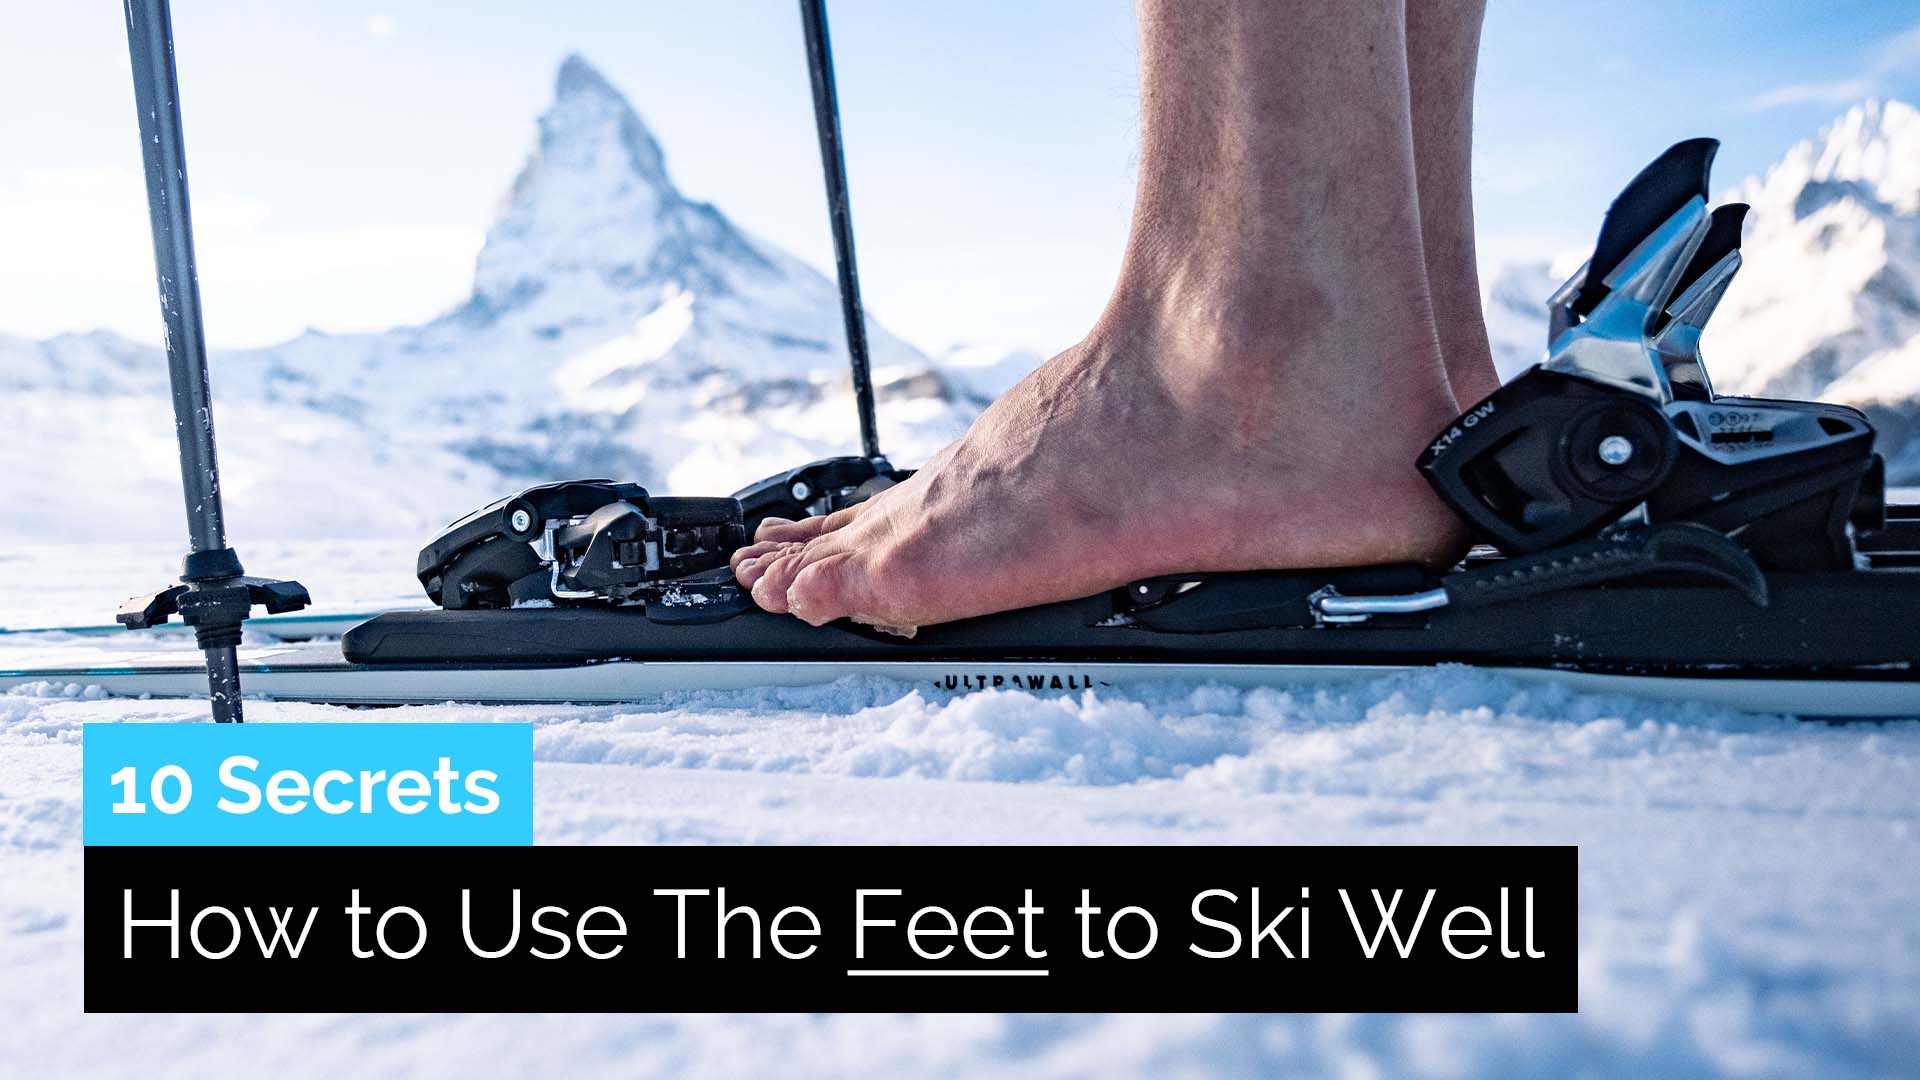 10 Secrets on How to Use the Feet to Ski Well